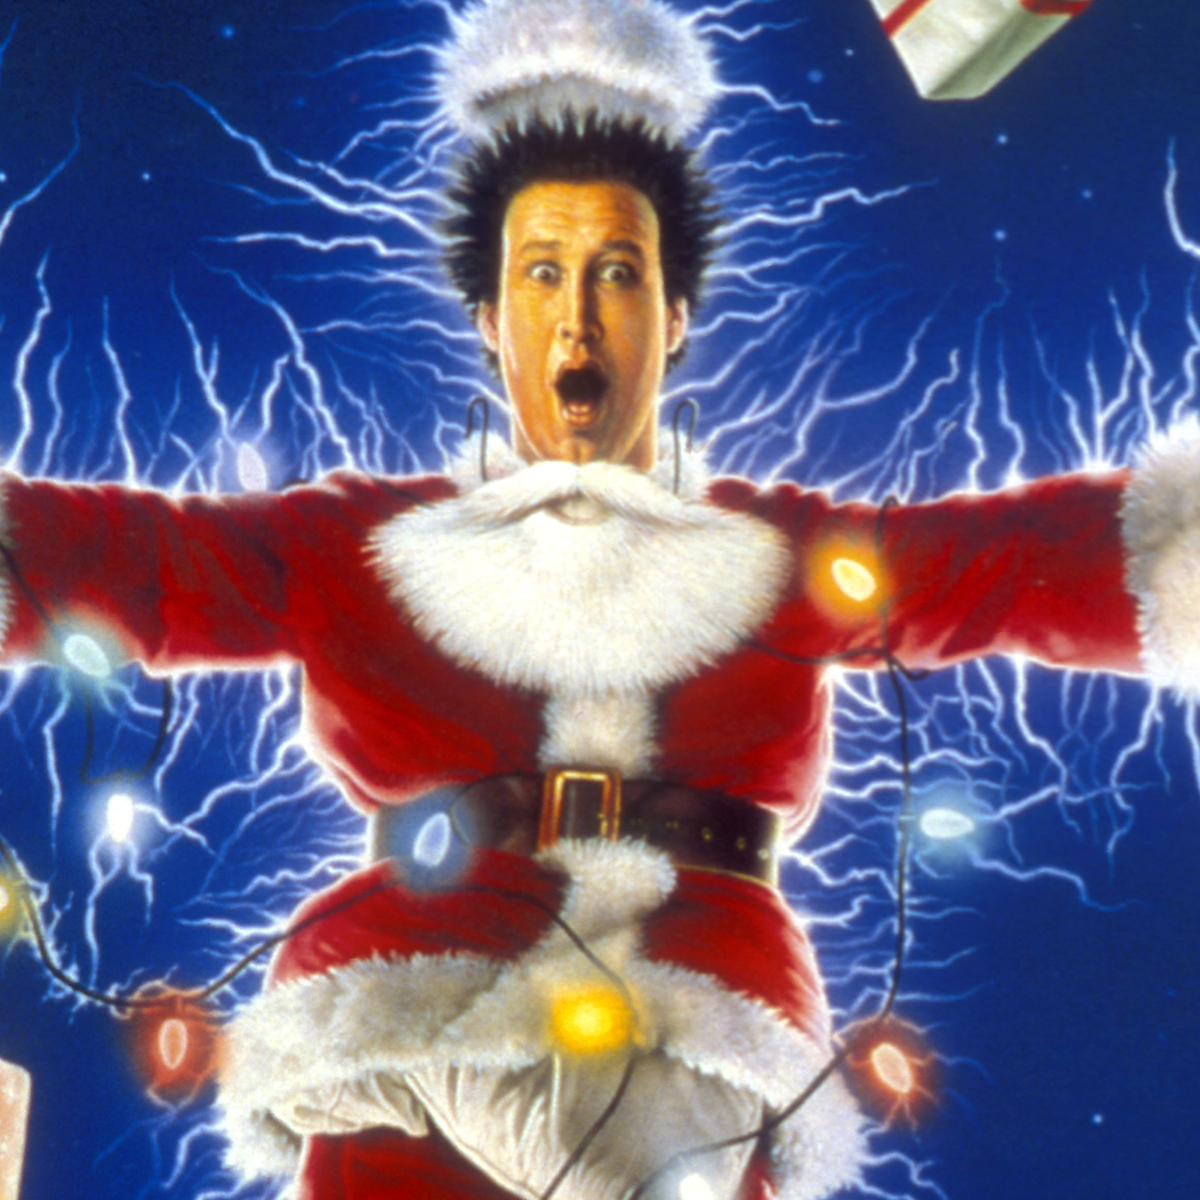 Clark Freaks Out - Christmas Vacation (9/10) Movie CLIP (1989) HD 